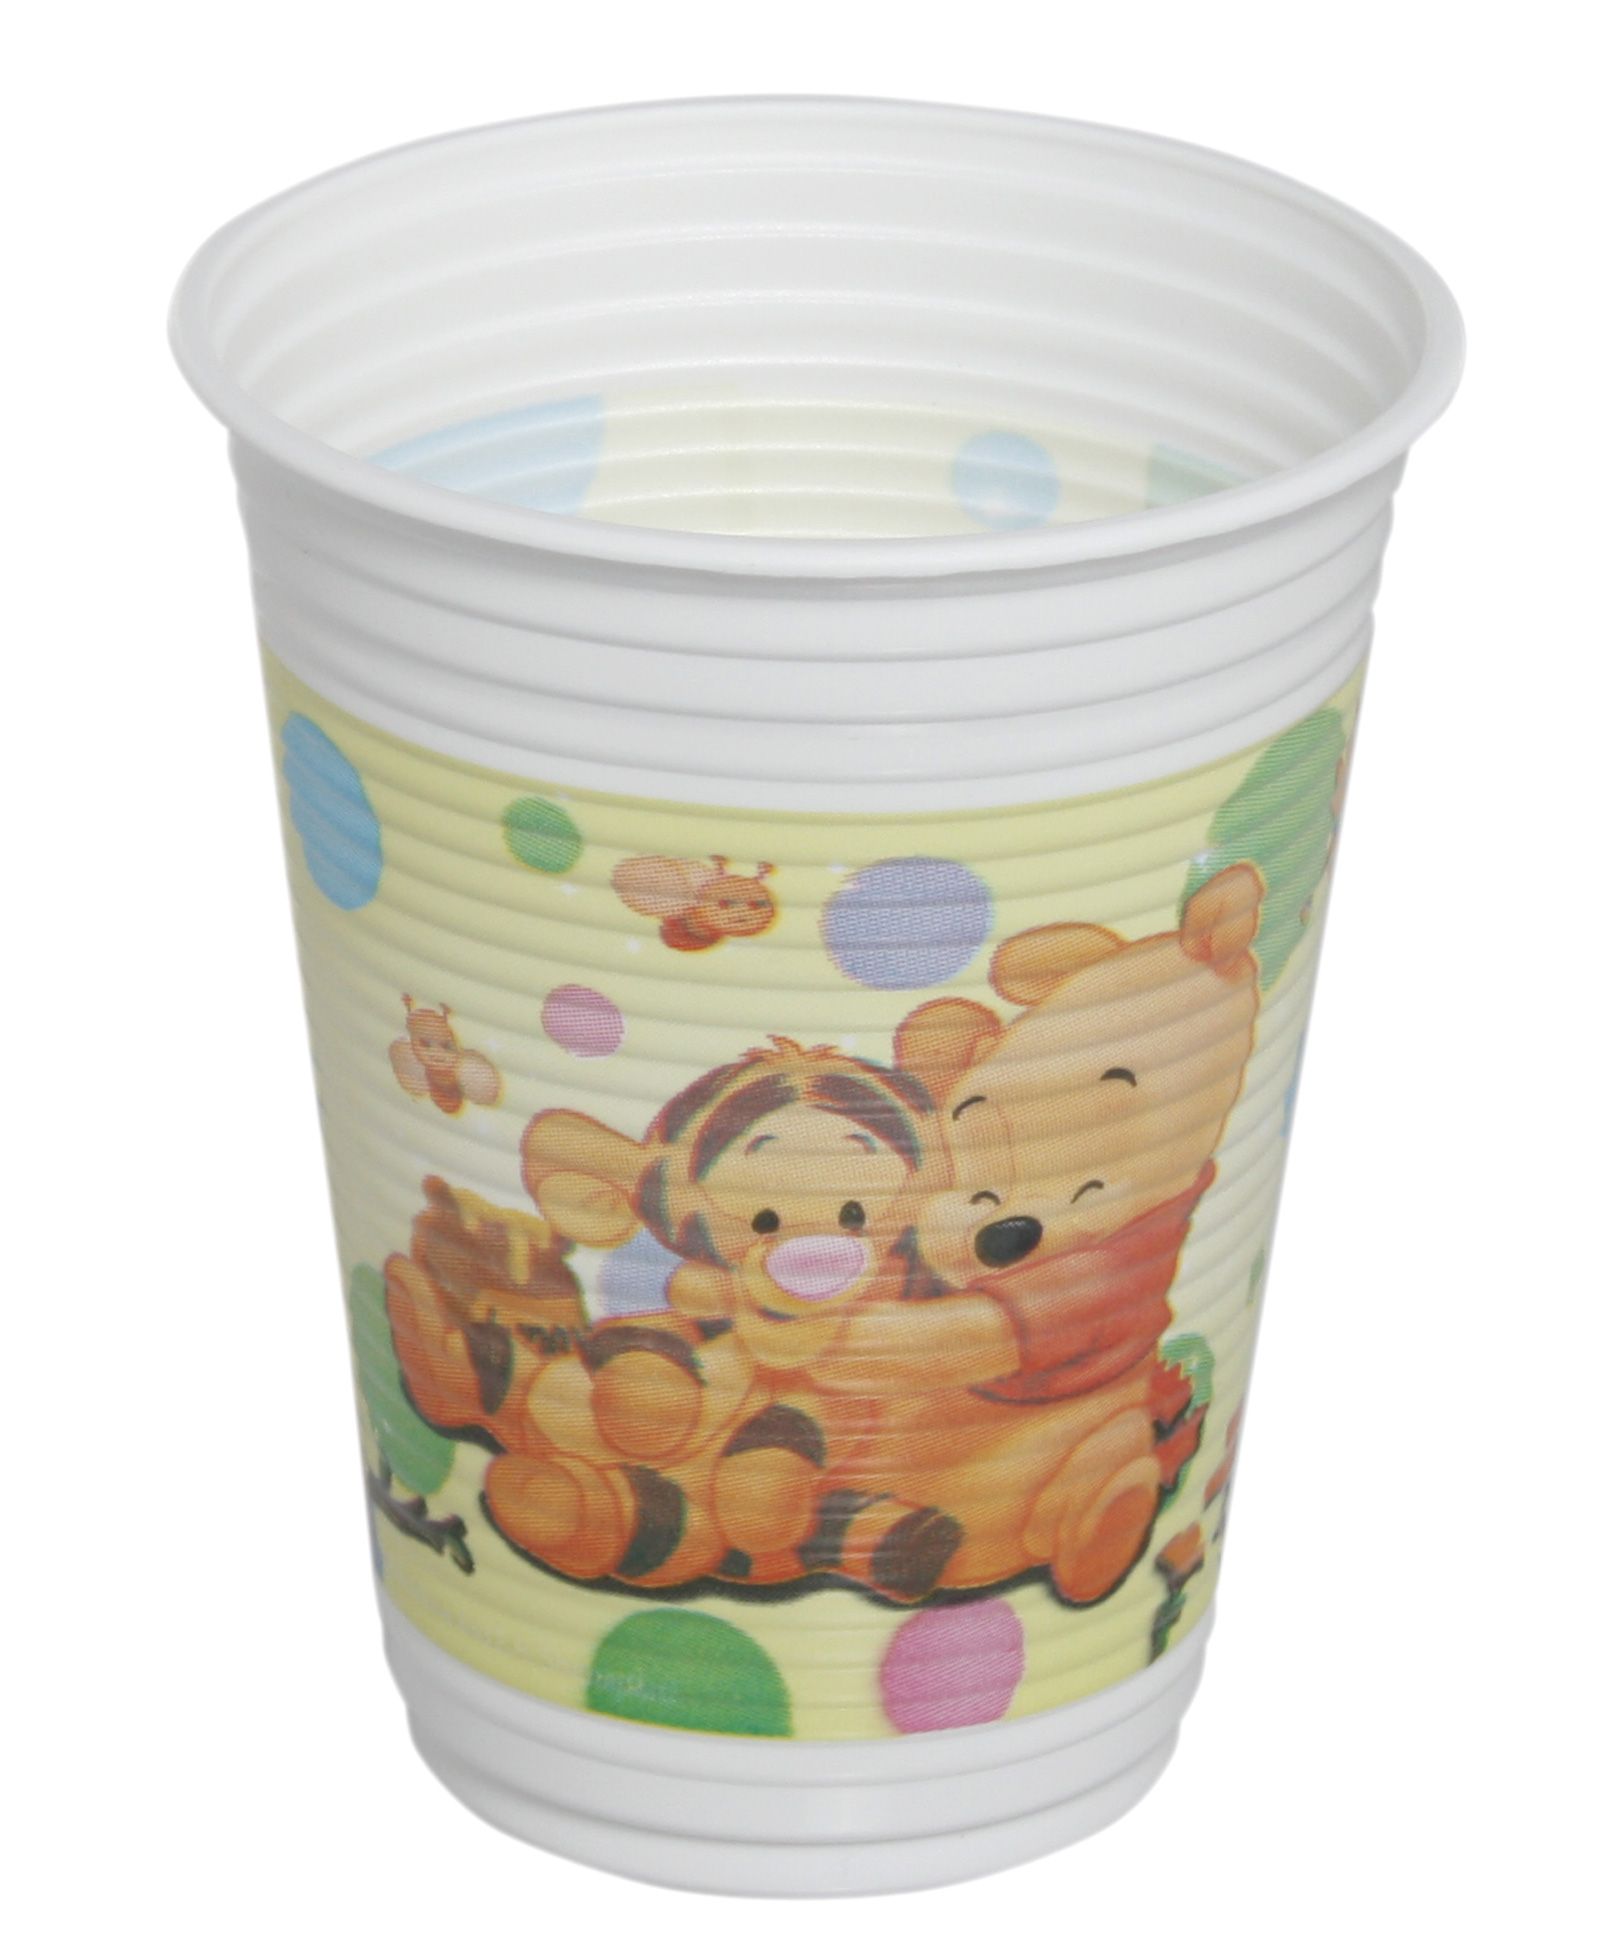 Disney Winnie the Pooh and Friends - Plastic Cup